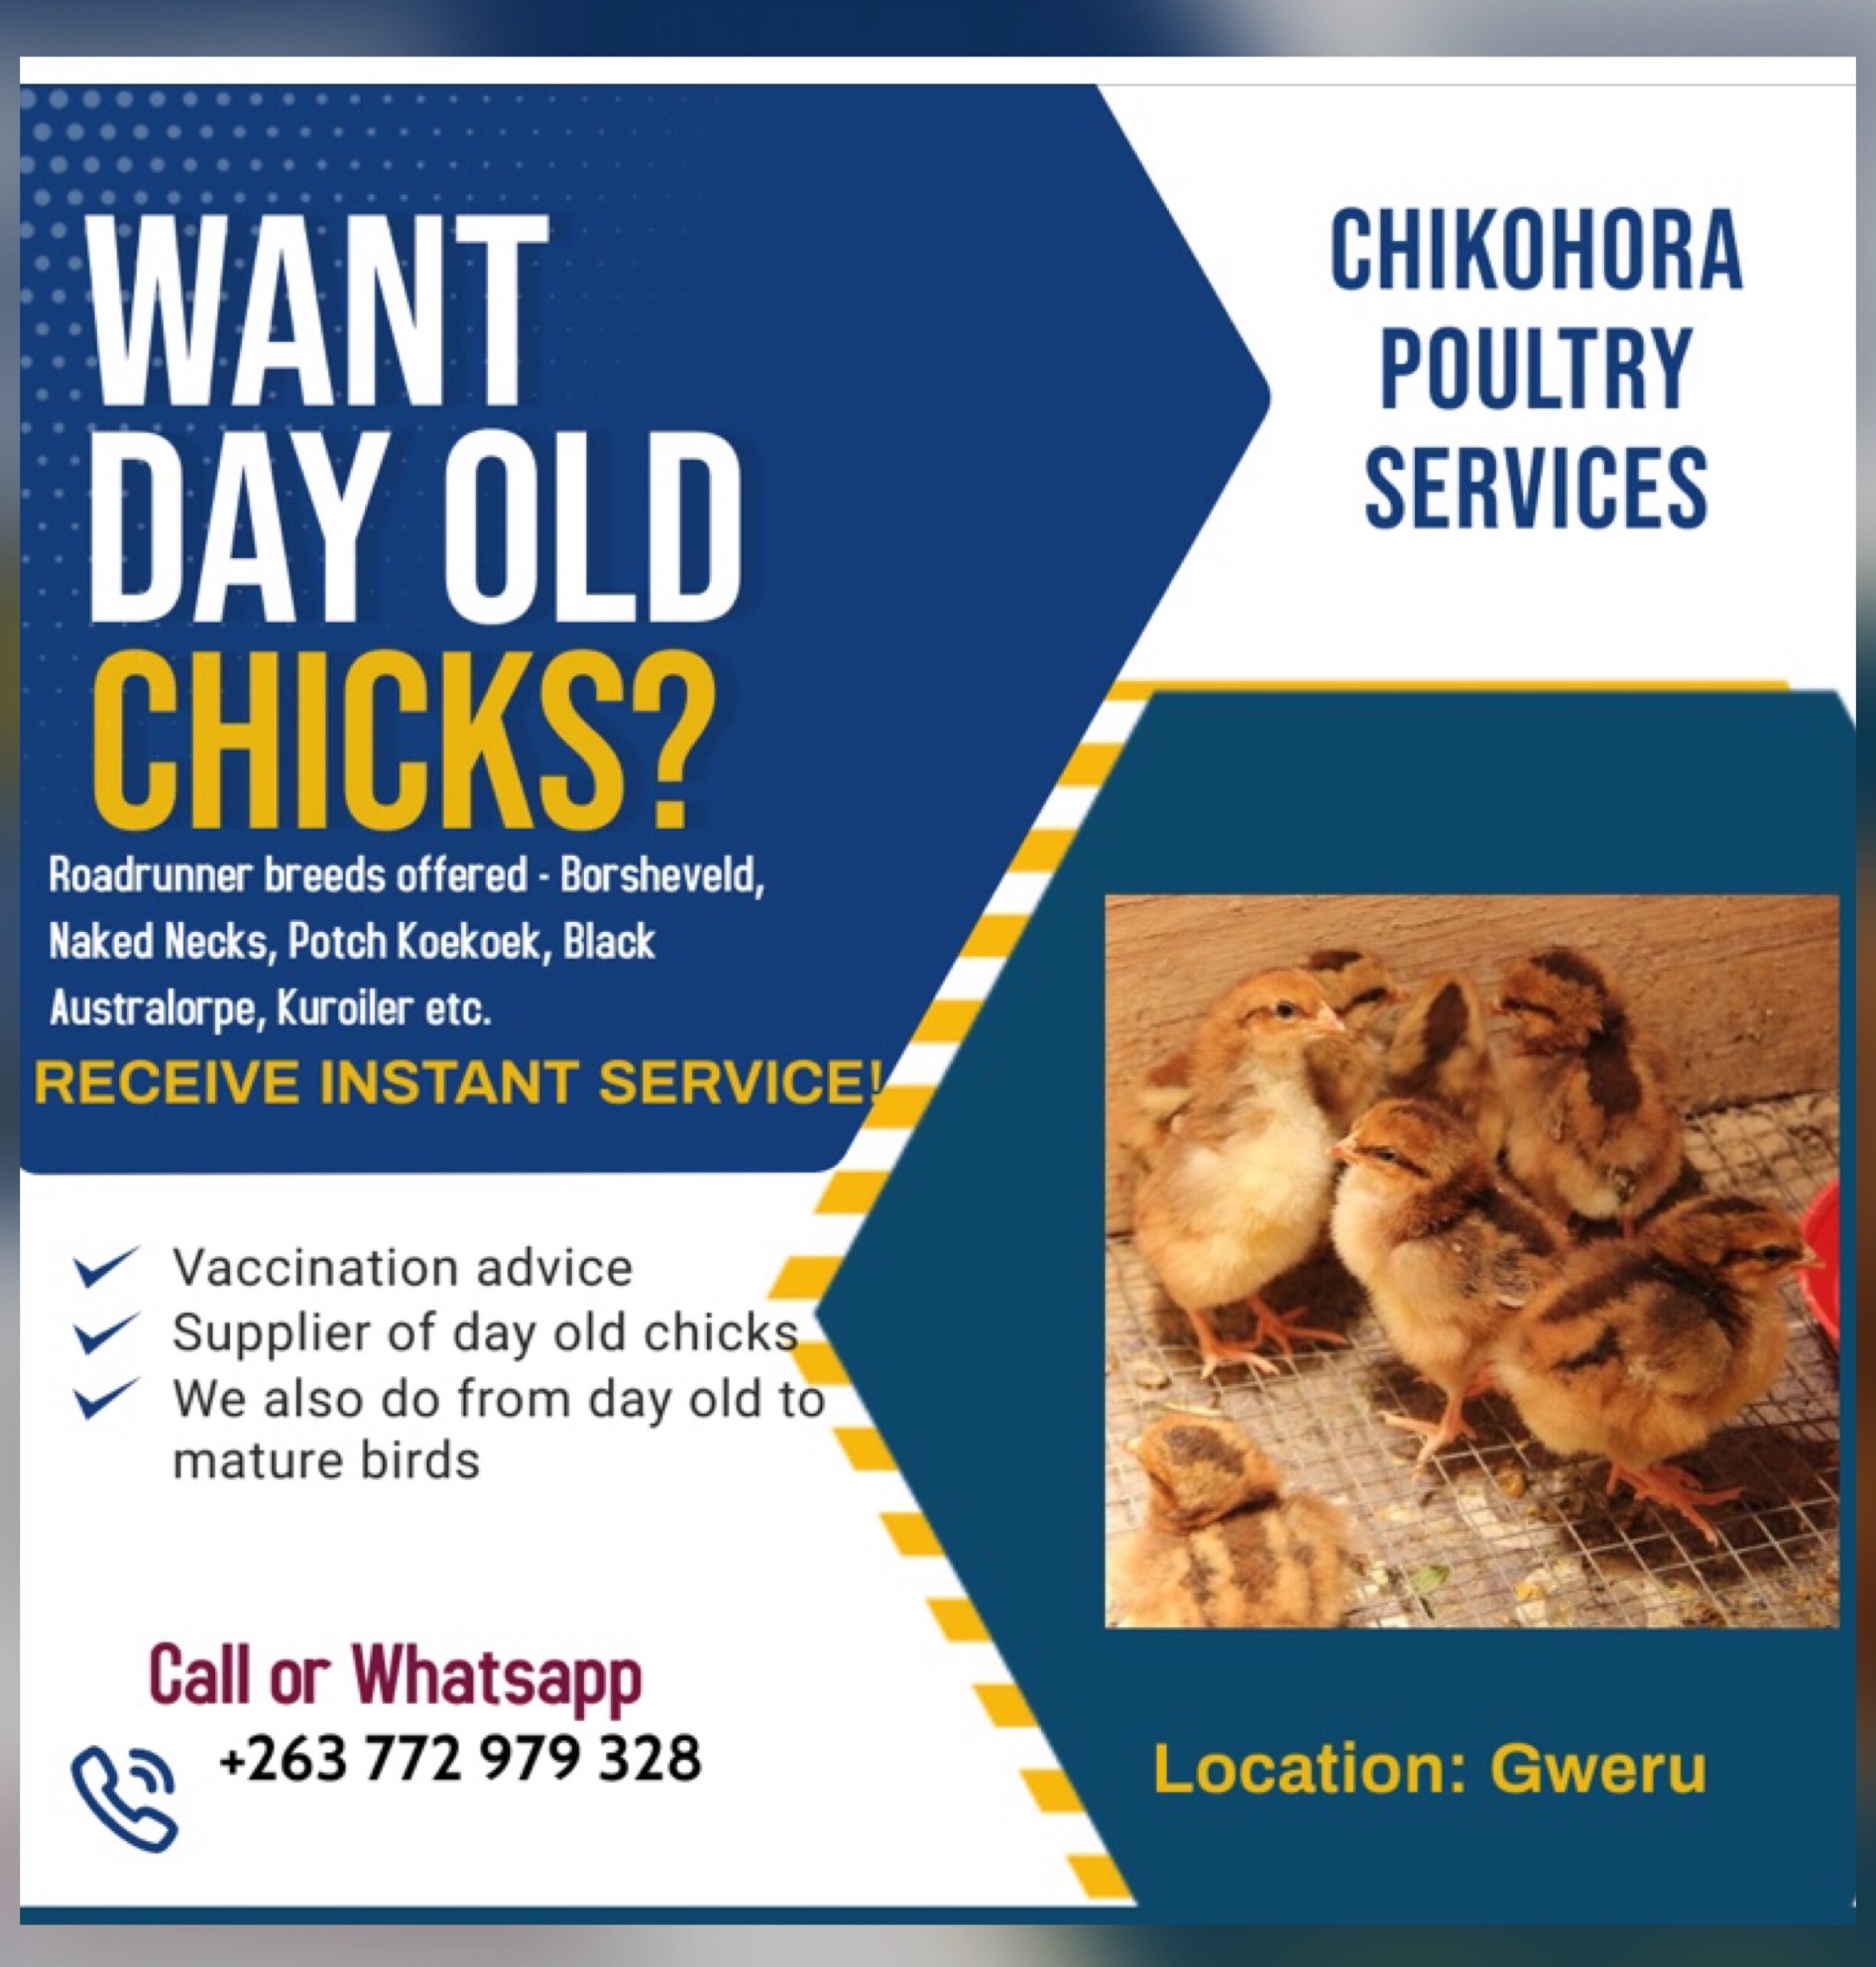 Chikohora Poultry Services